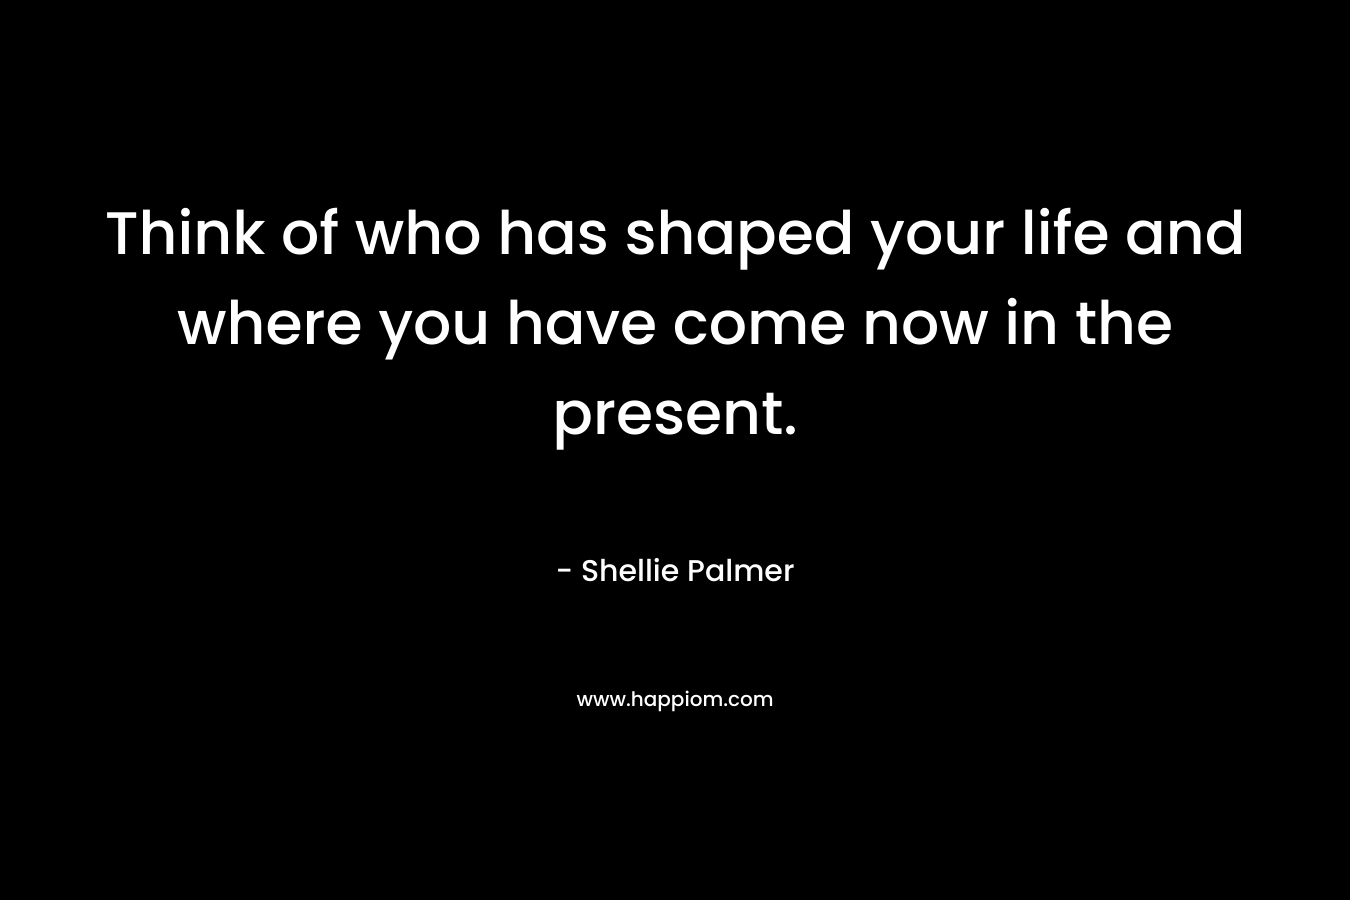 Think of who has shaped your life and where you have come now in the present.